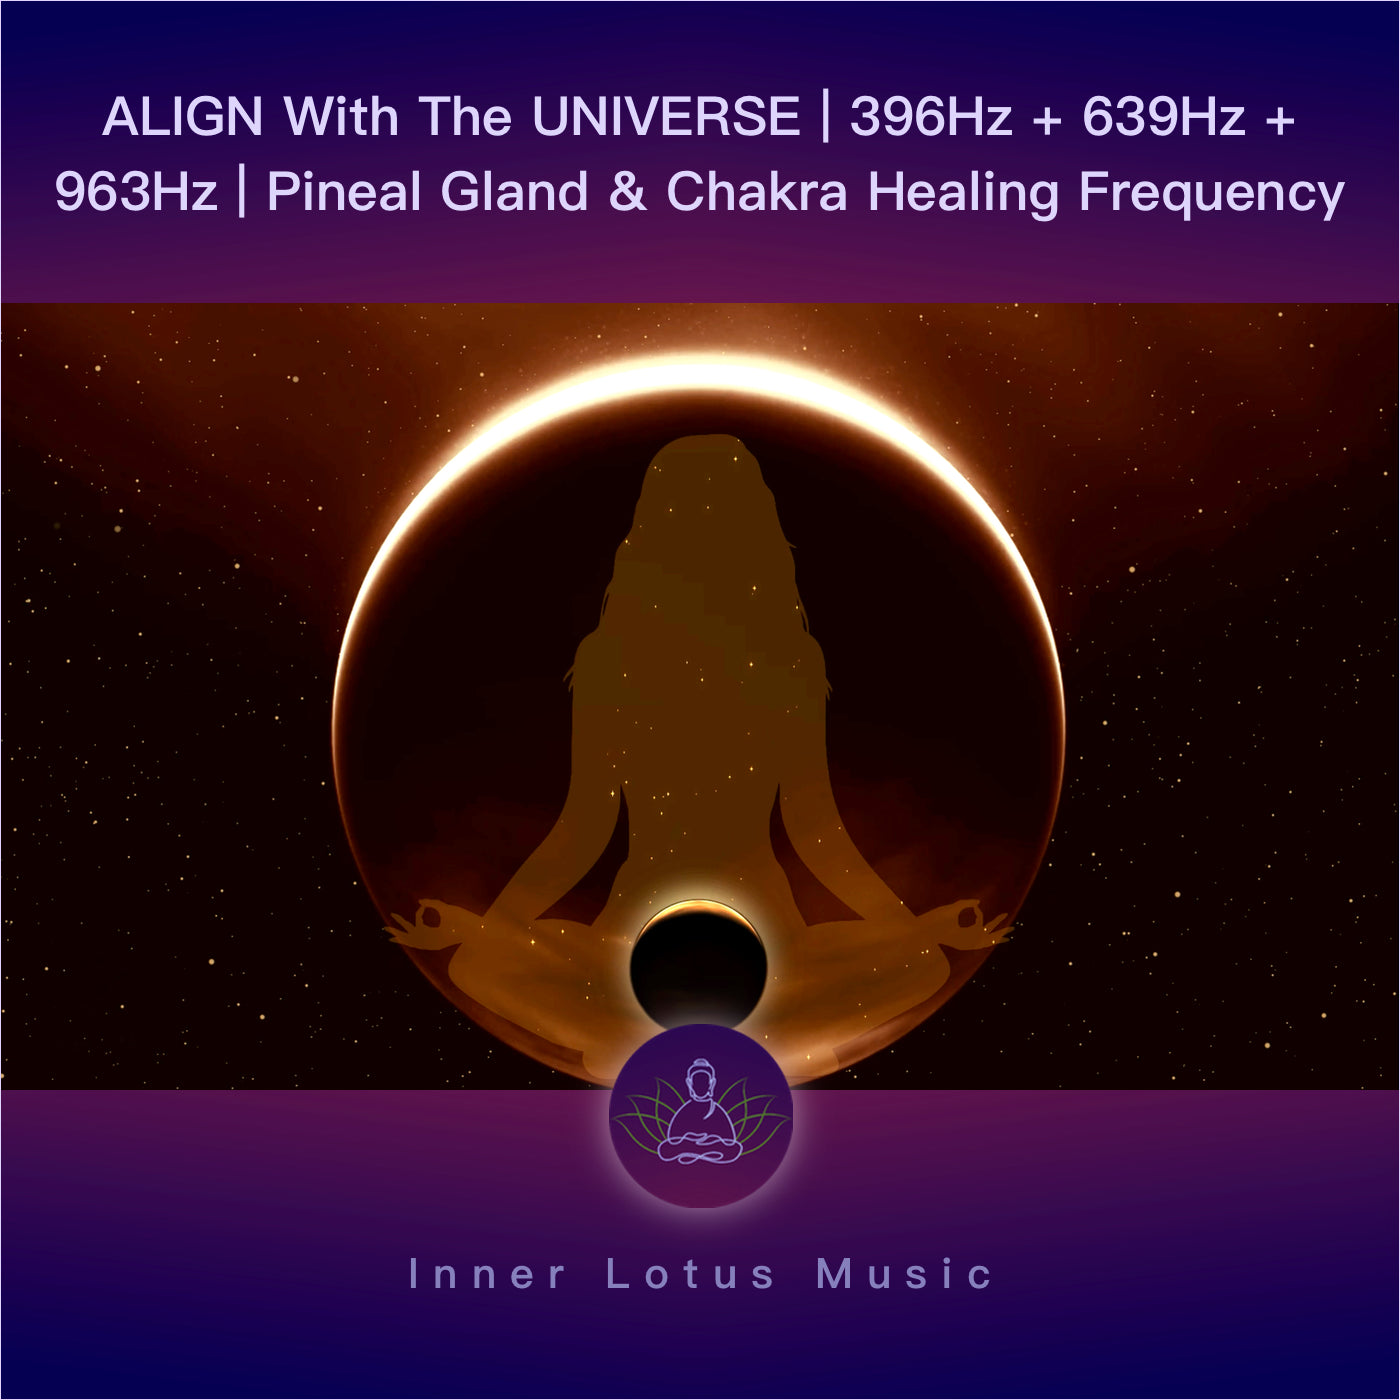 ALIGN With The UNIVERSE | 396Hz + 639Hz + 963Hz | Pineal Gland & Chakra Healing Frequency Immersion